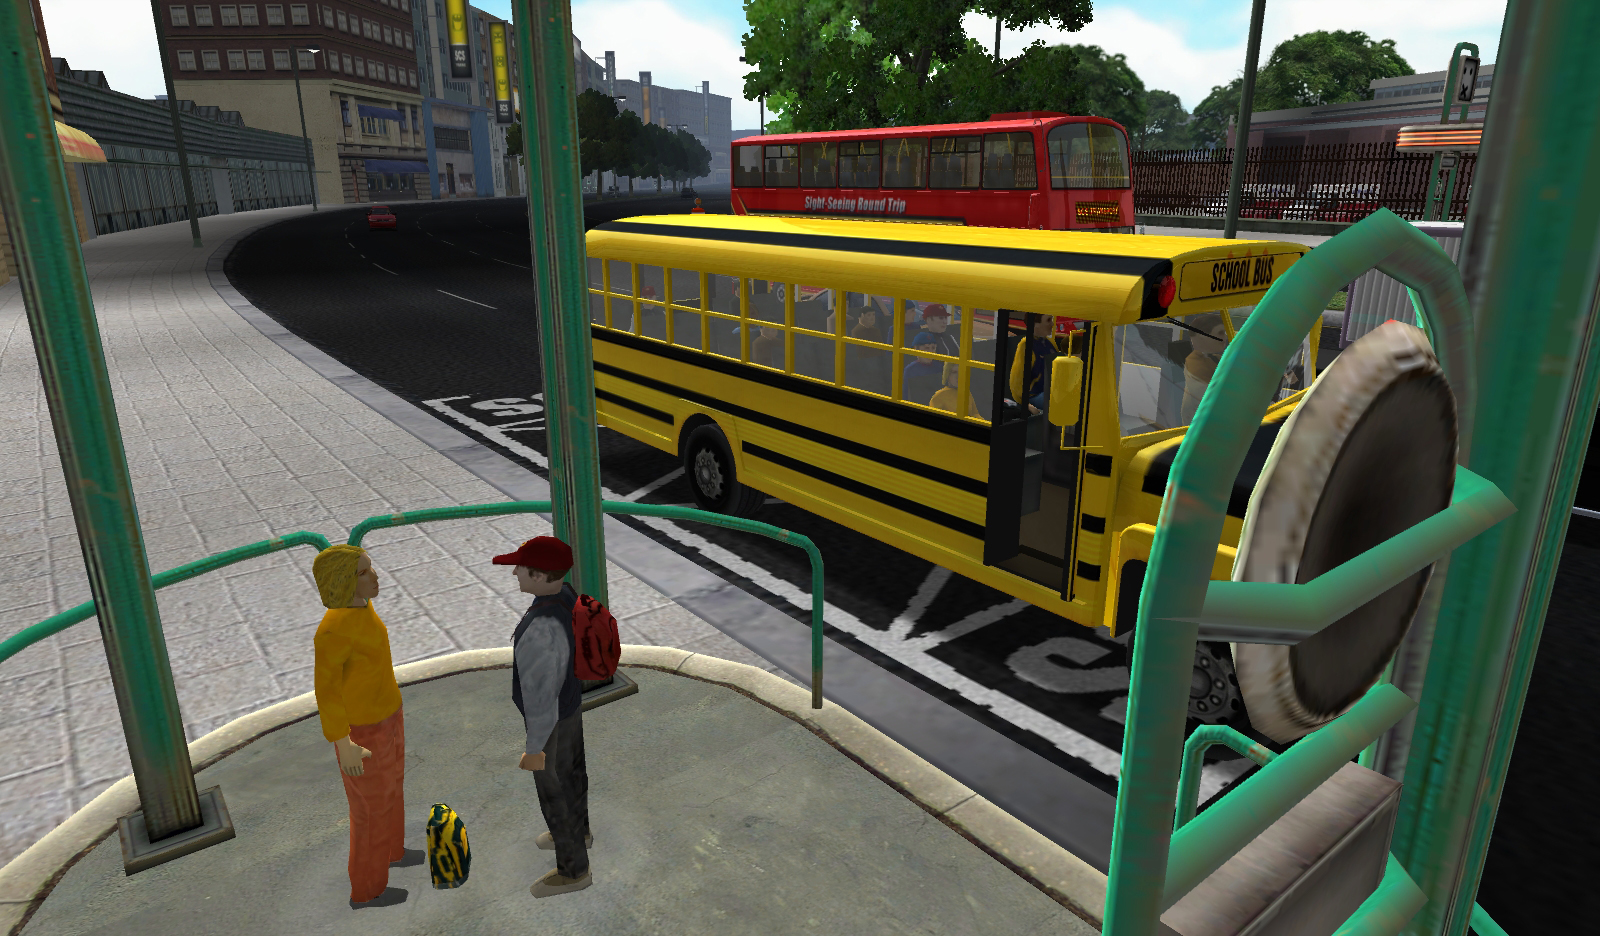 bus driver game free download full version for pc windows 7